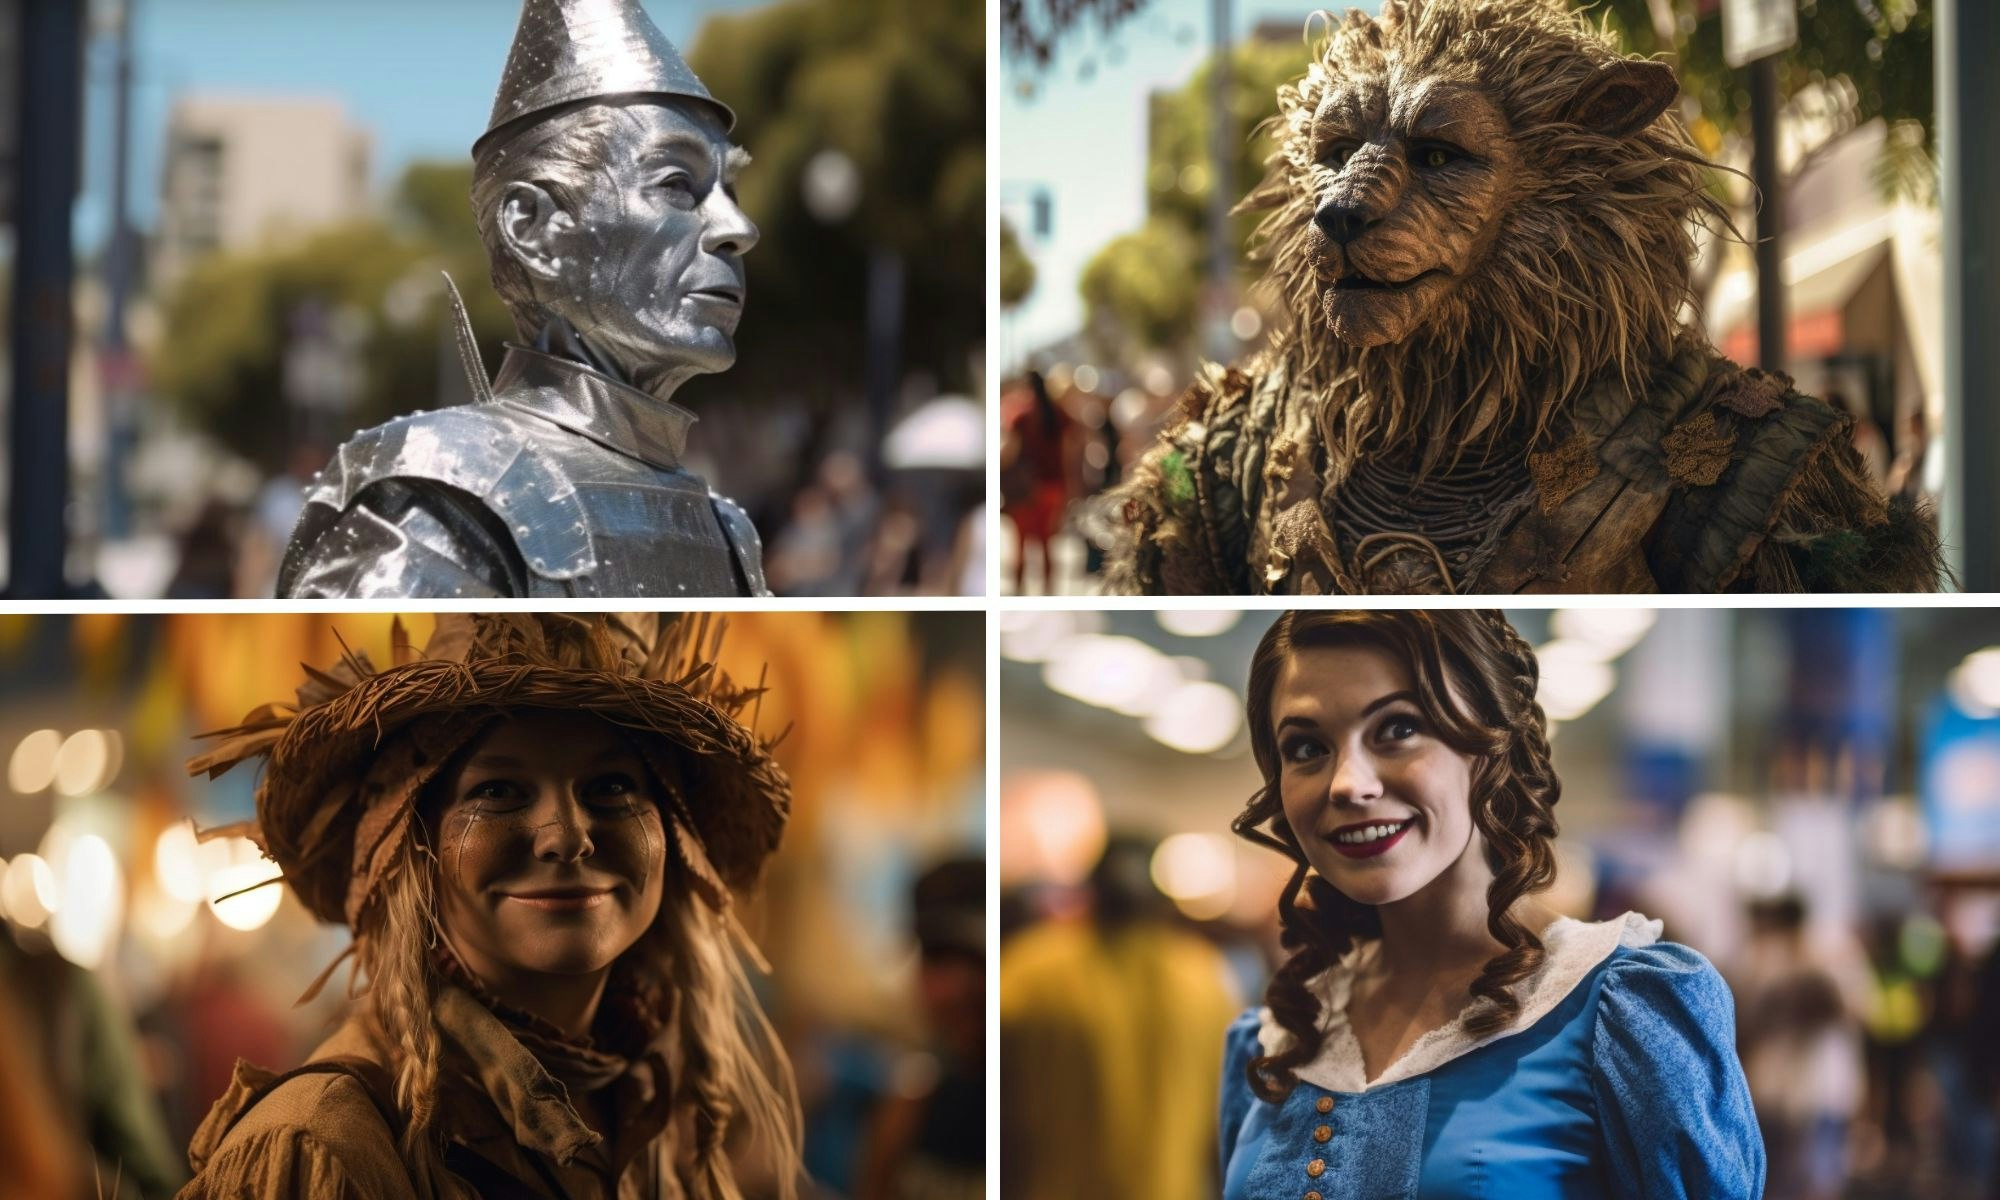 The Wizard of Oz Experience in Traralgon